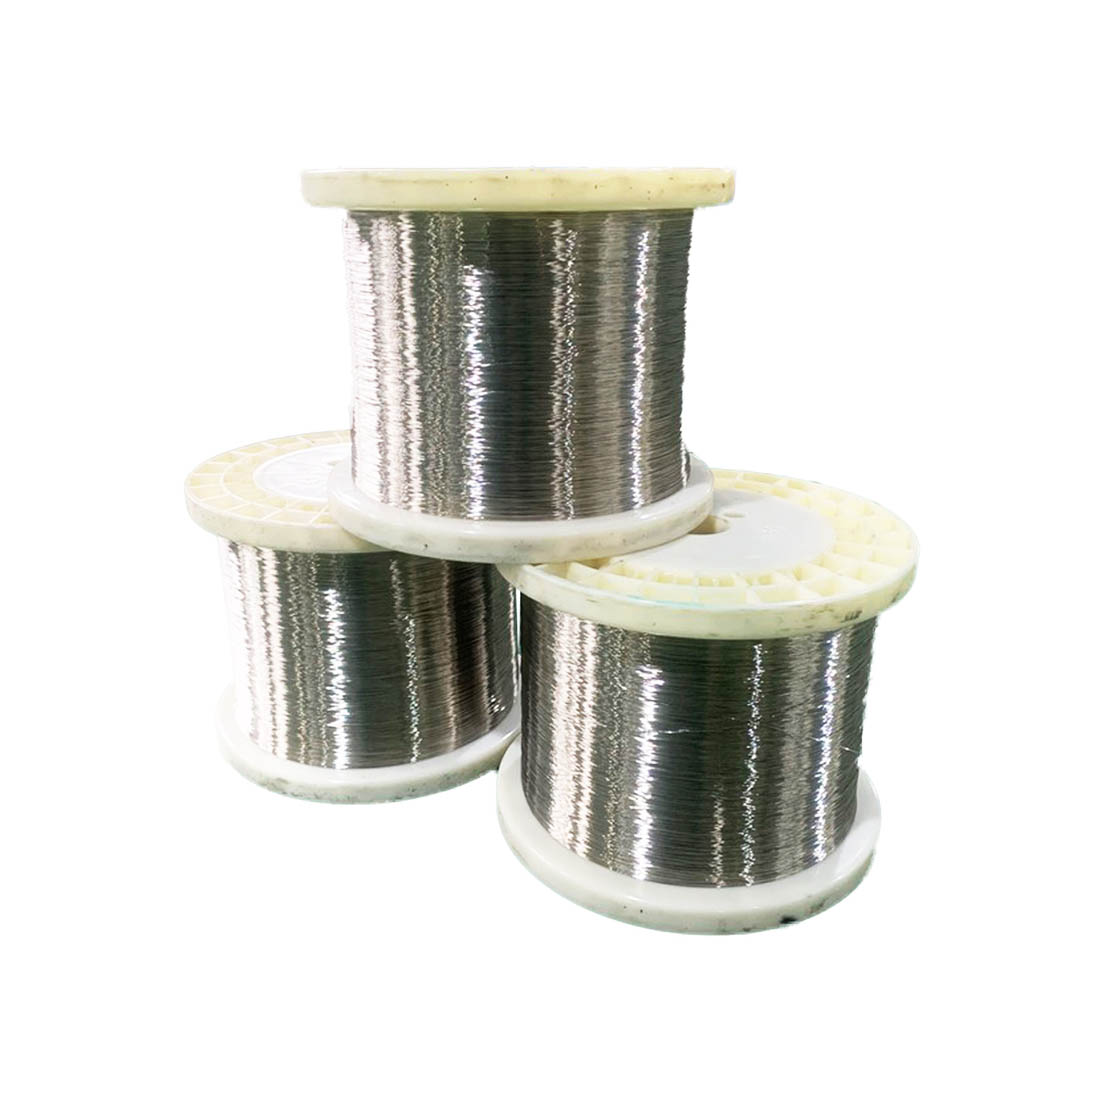 Manufactur standard 15 Awg Nickel Plated Copper Wire - Source Factory 43 Awg Nickel Plated Copper Wire for Sale – Tianchuang